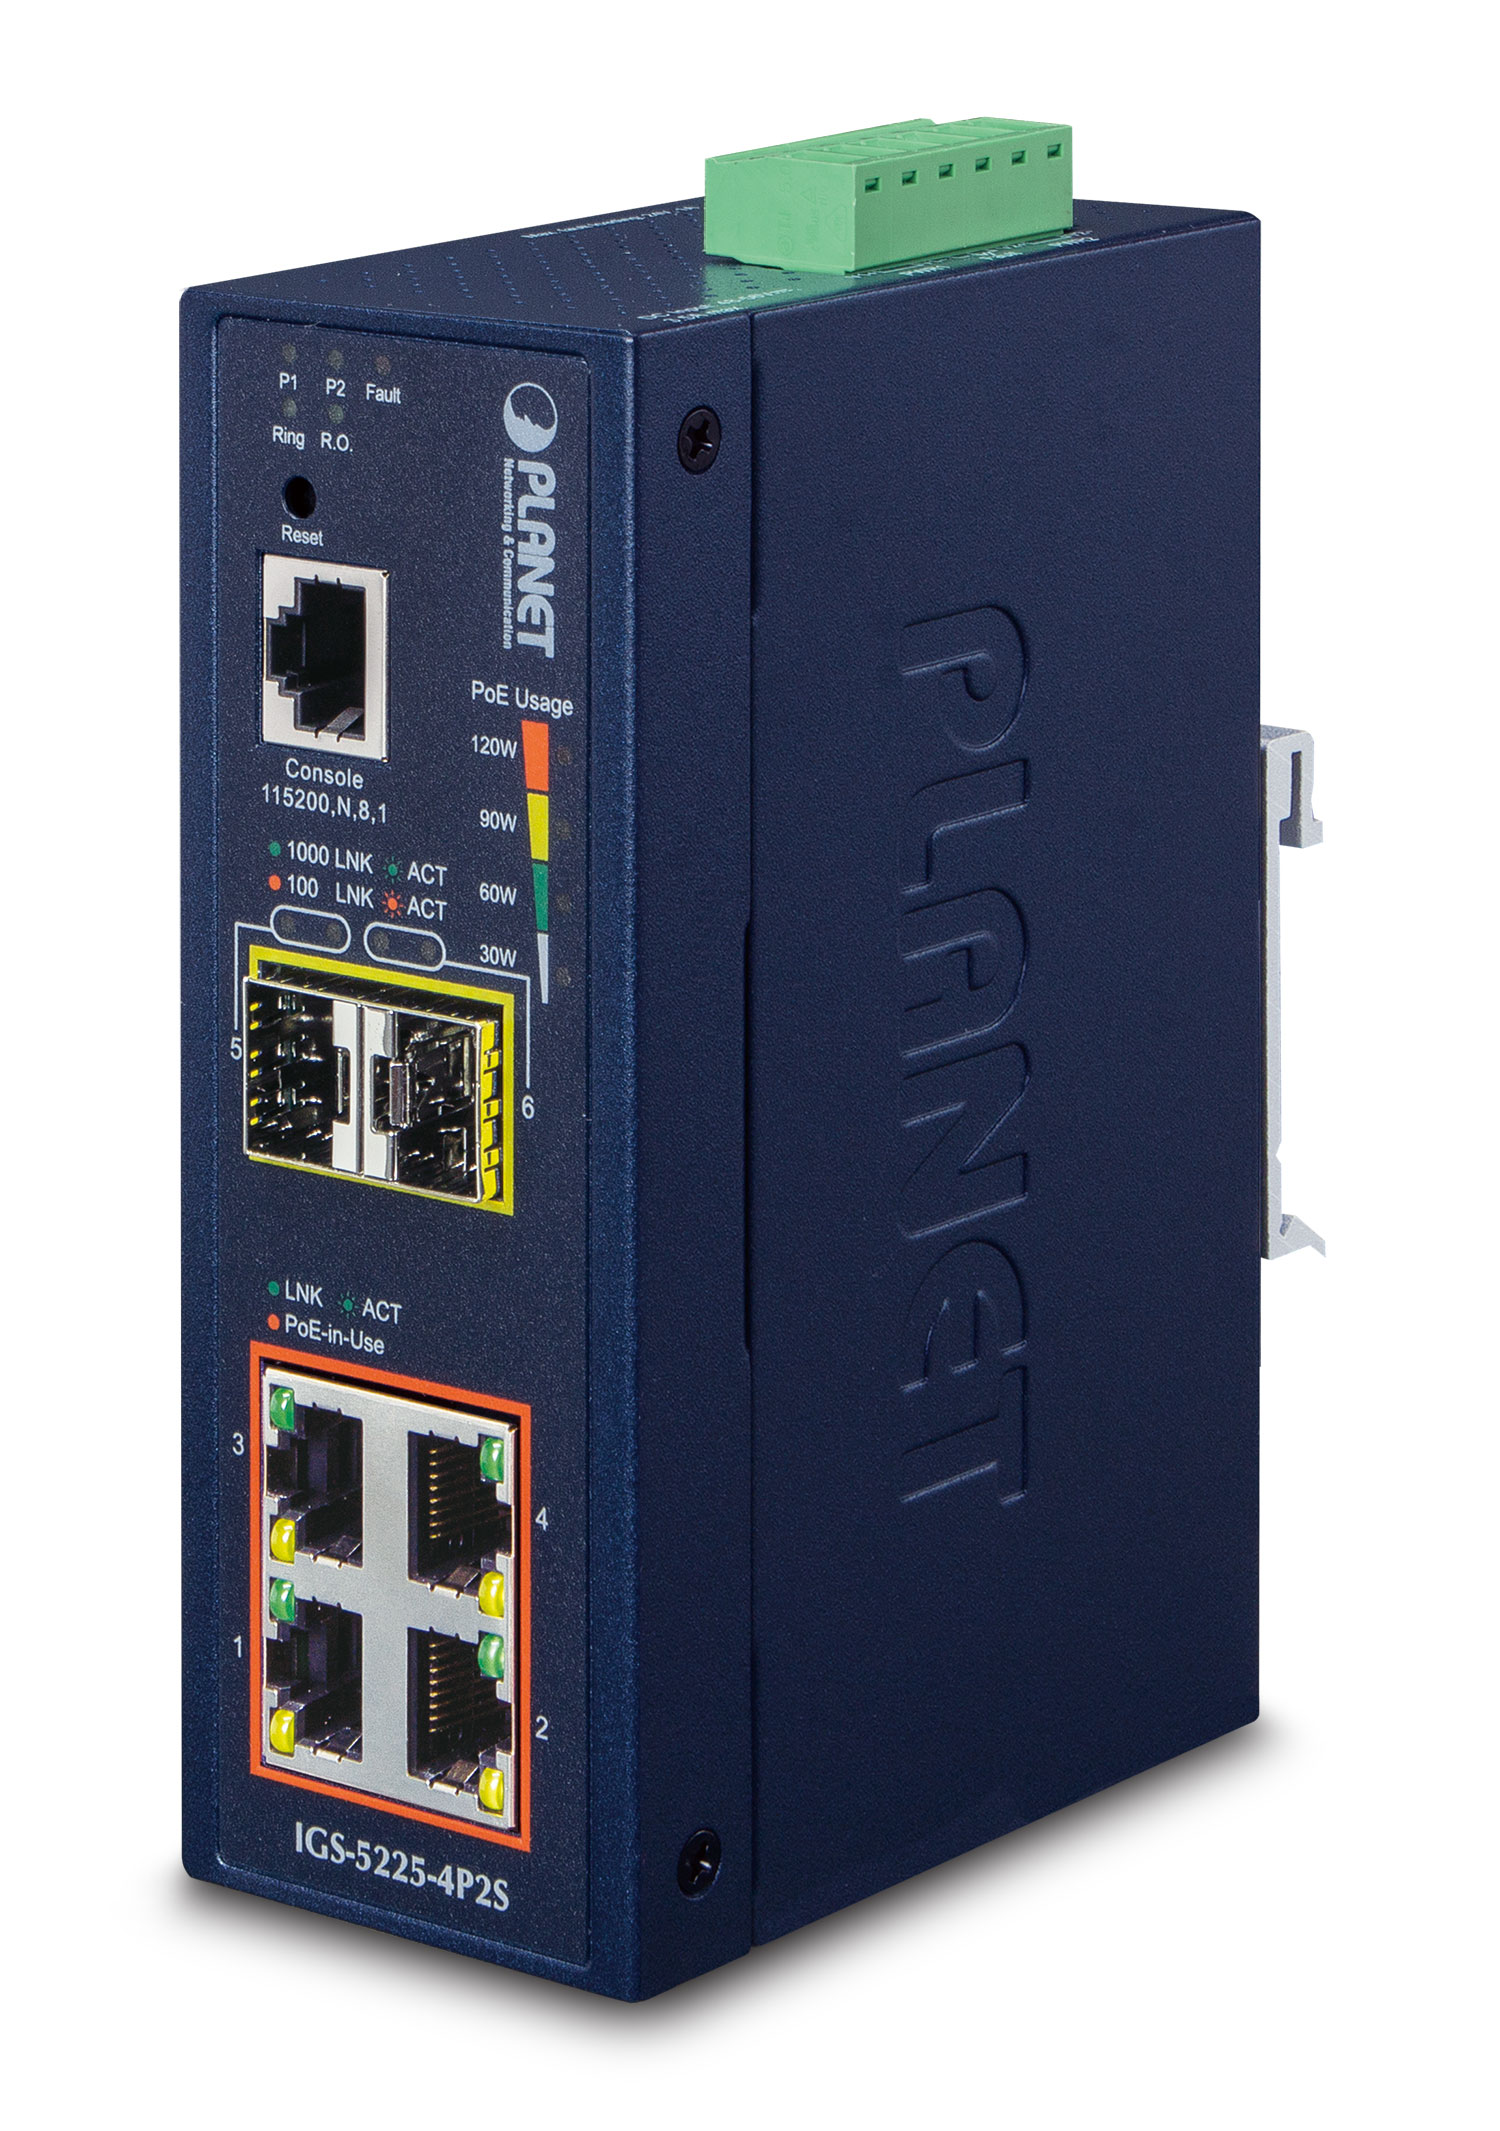 【IGS-5225-4P2S】L2+ Industrial 4-Port 10/100/1000T 802.3at PoE + 2-Port 100/1000X SFP Managed Ethernet Switch